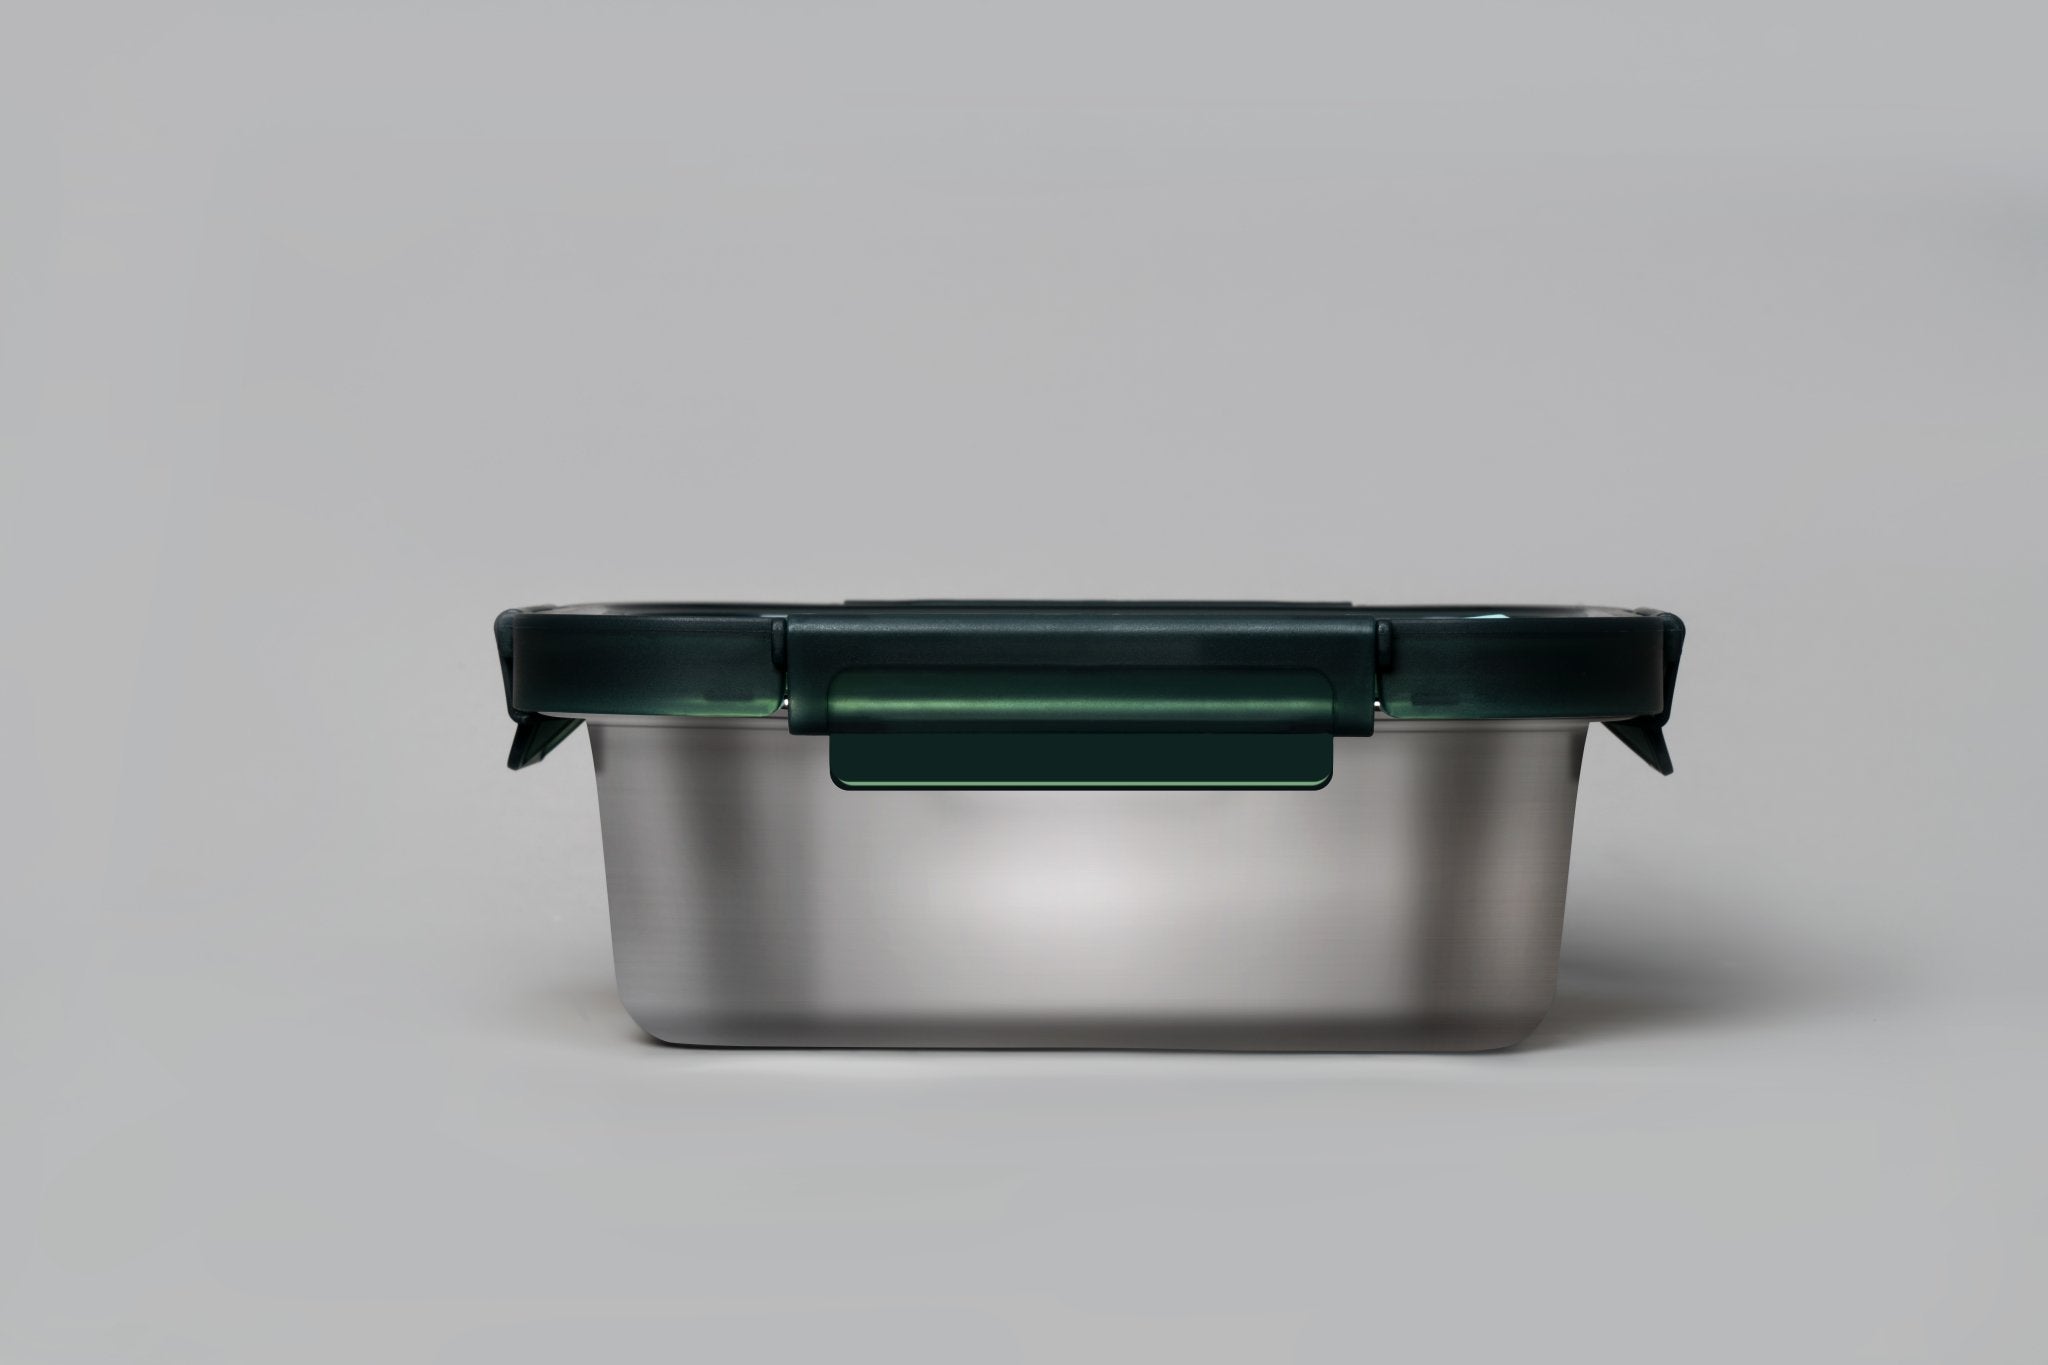 https://genicook.com/cdn/shop/products/square-microwave-safe-stainless-steel-container-600-800-mlgenicooksiv600sq-gr-182669.jpg?v=1677728660